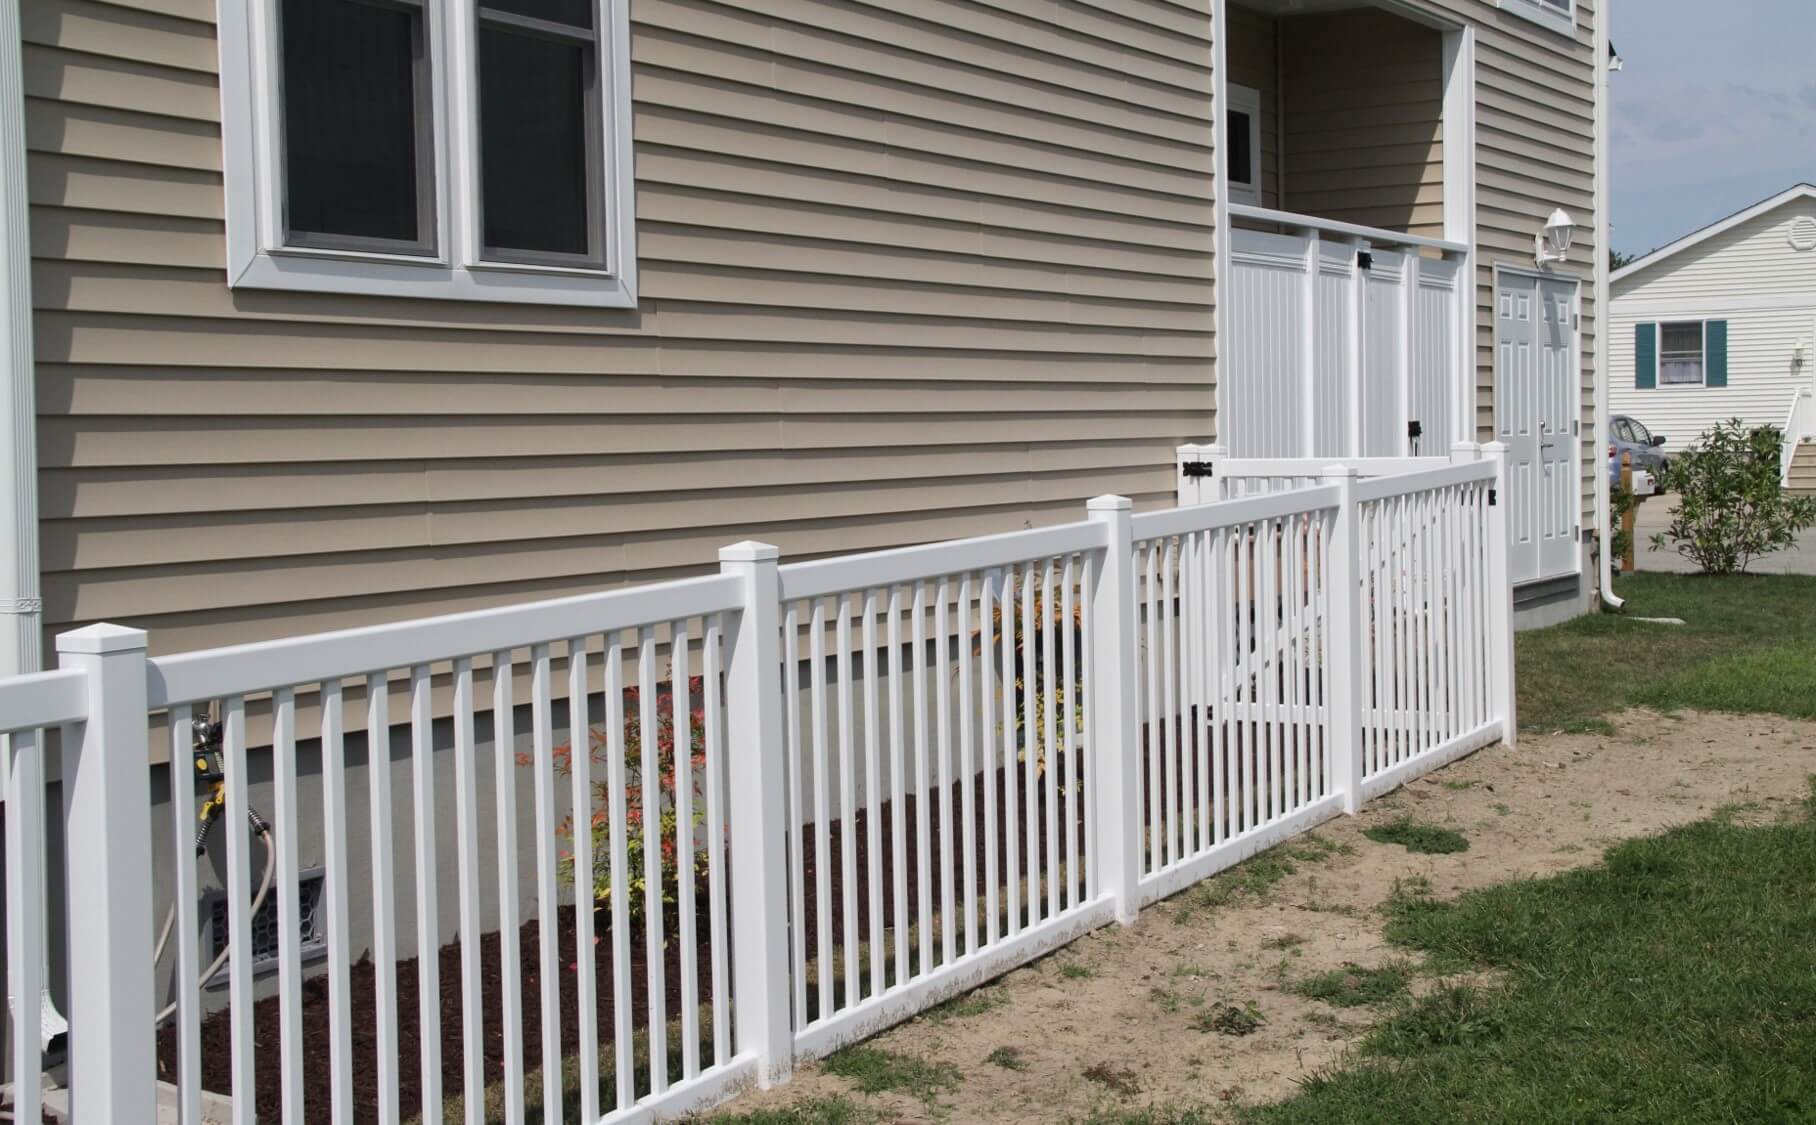 Product Application Case-victorian-vinyl-yard-fence-6